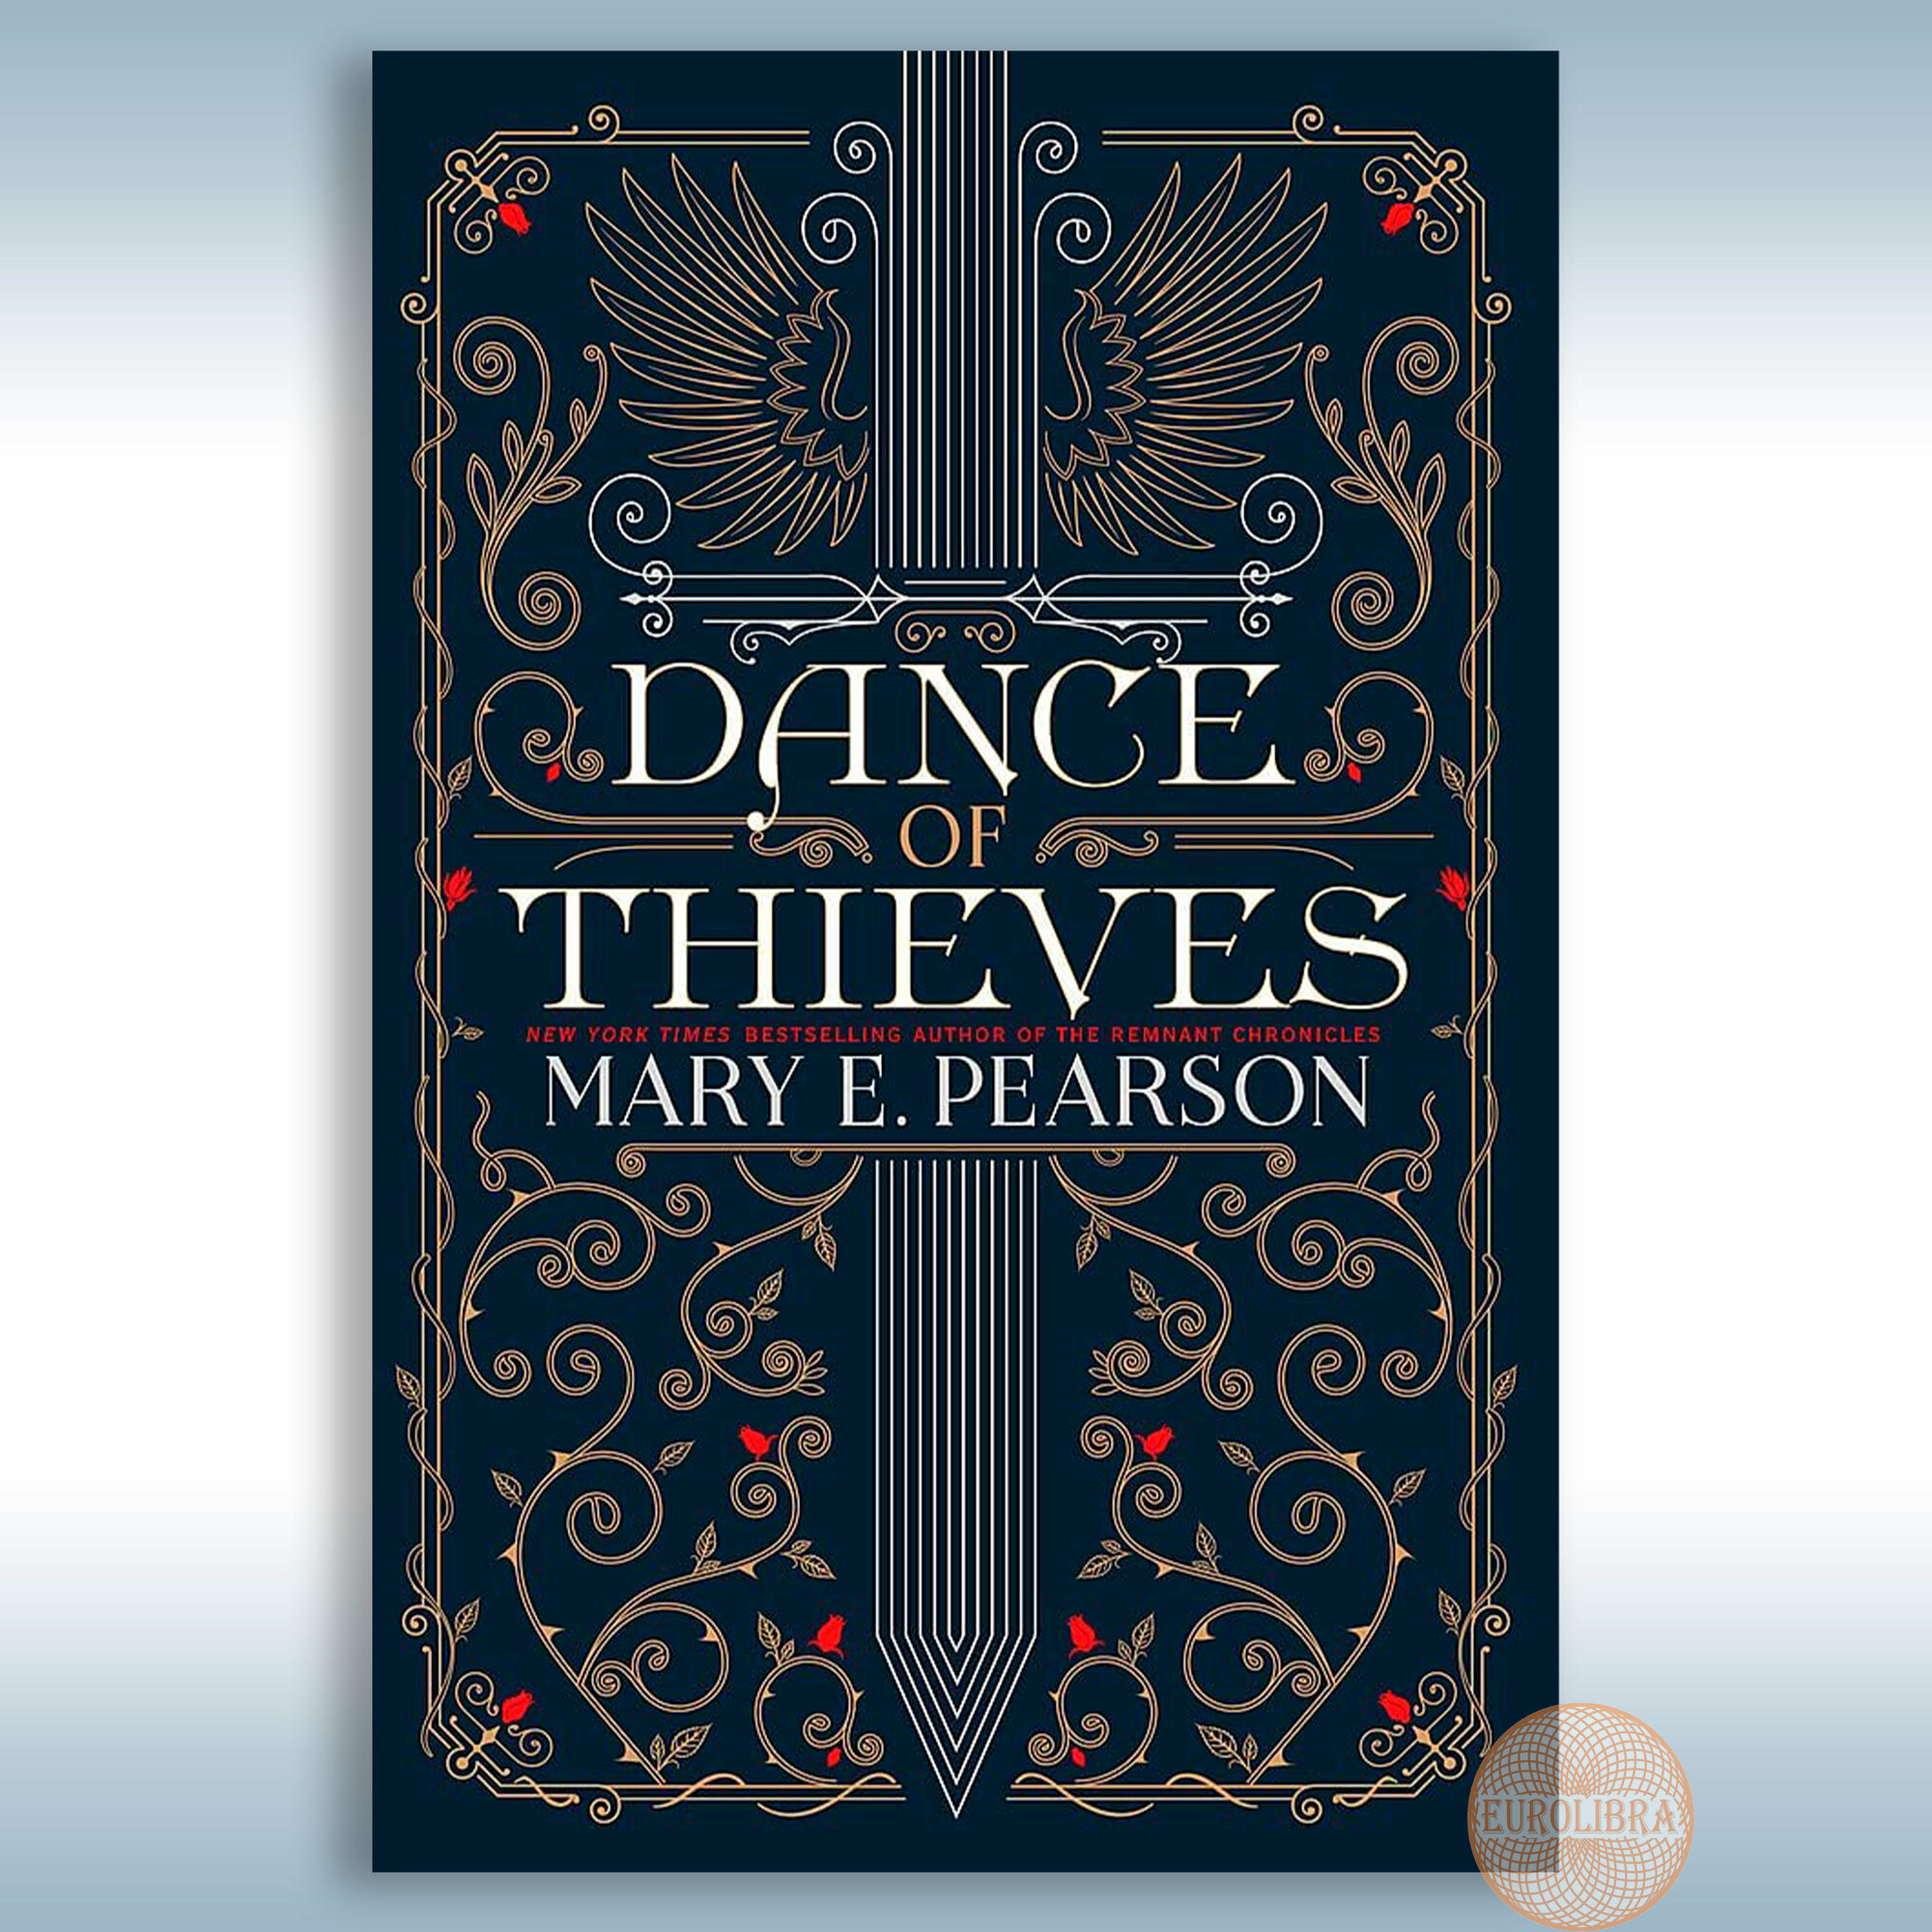 Dance of Thieves (Mary Pearson)